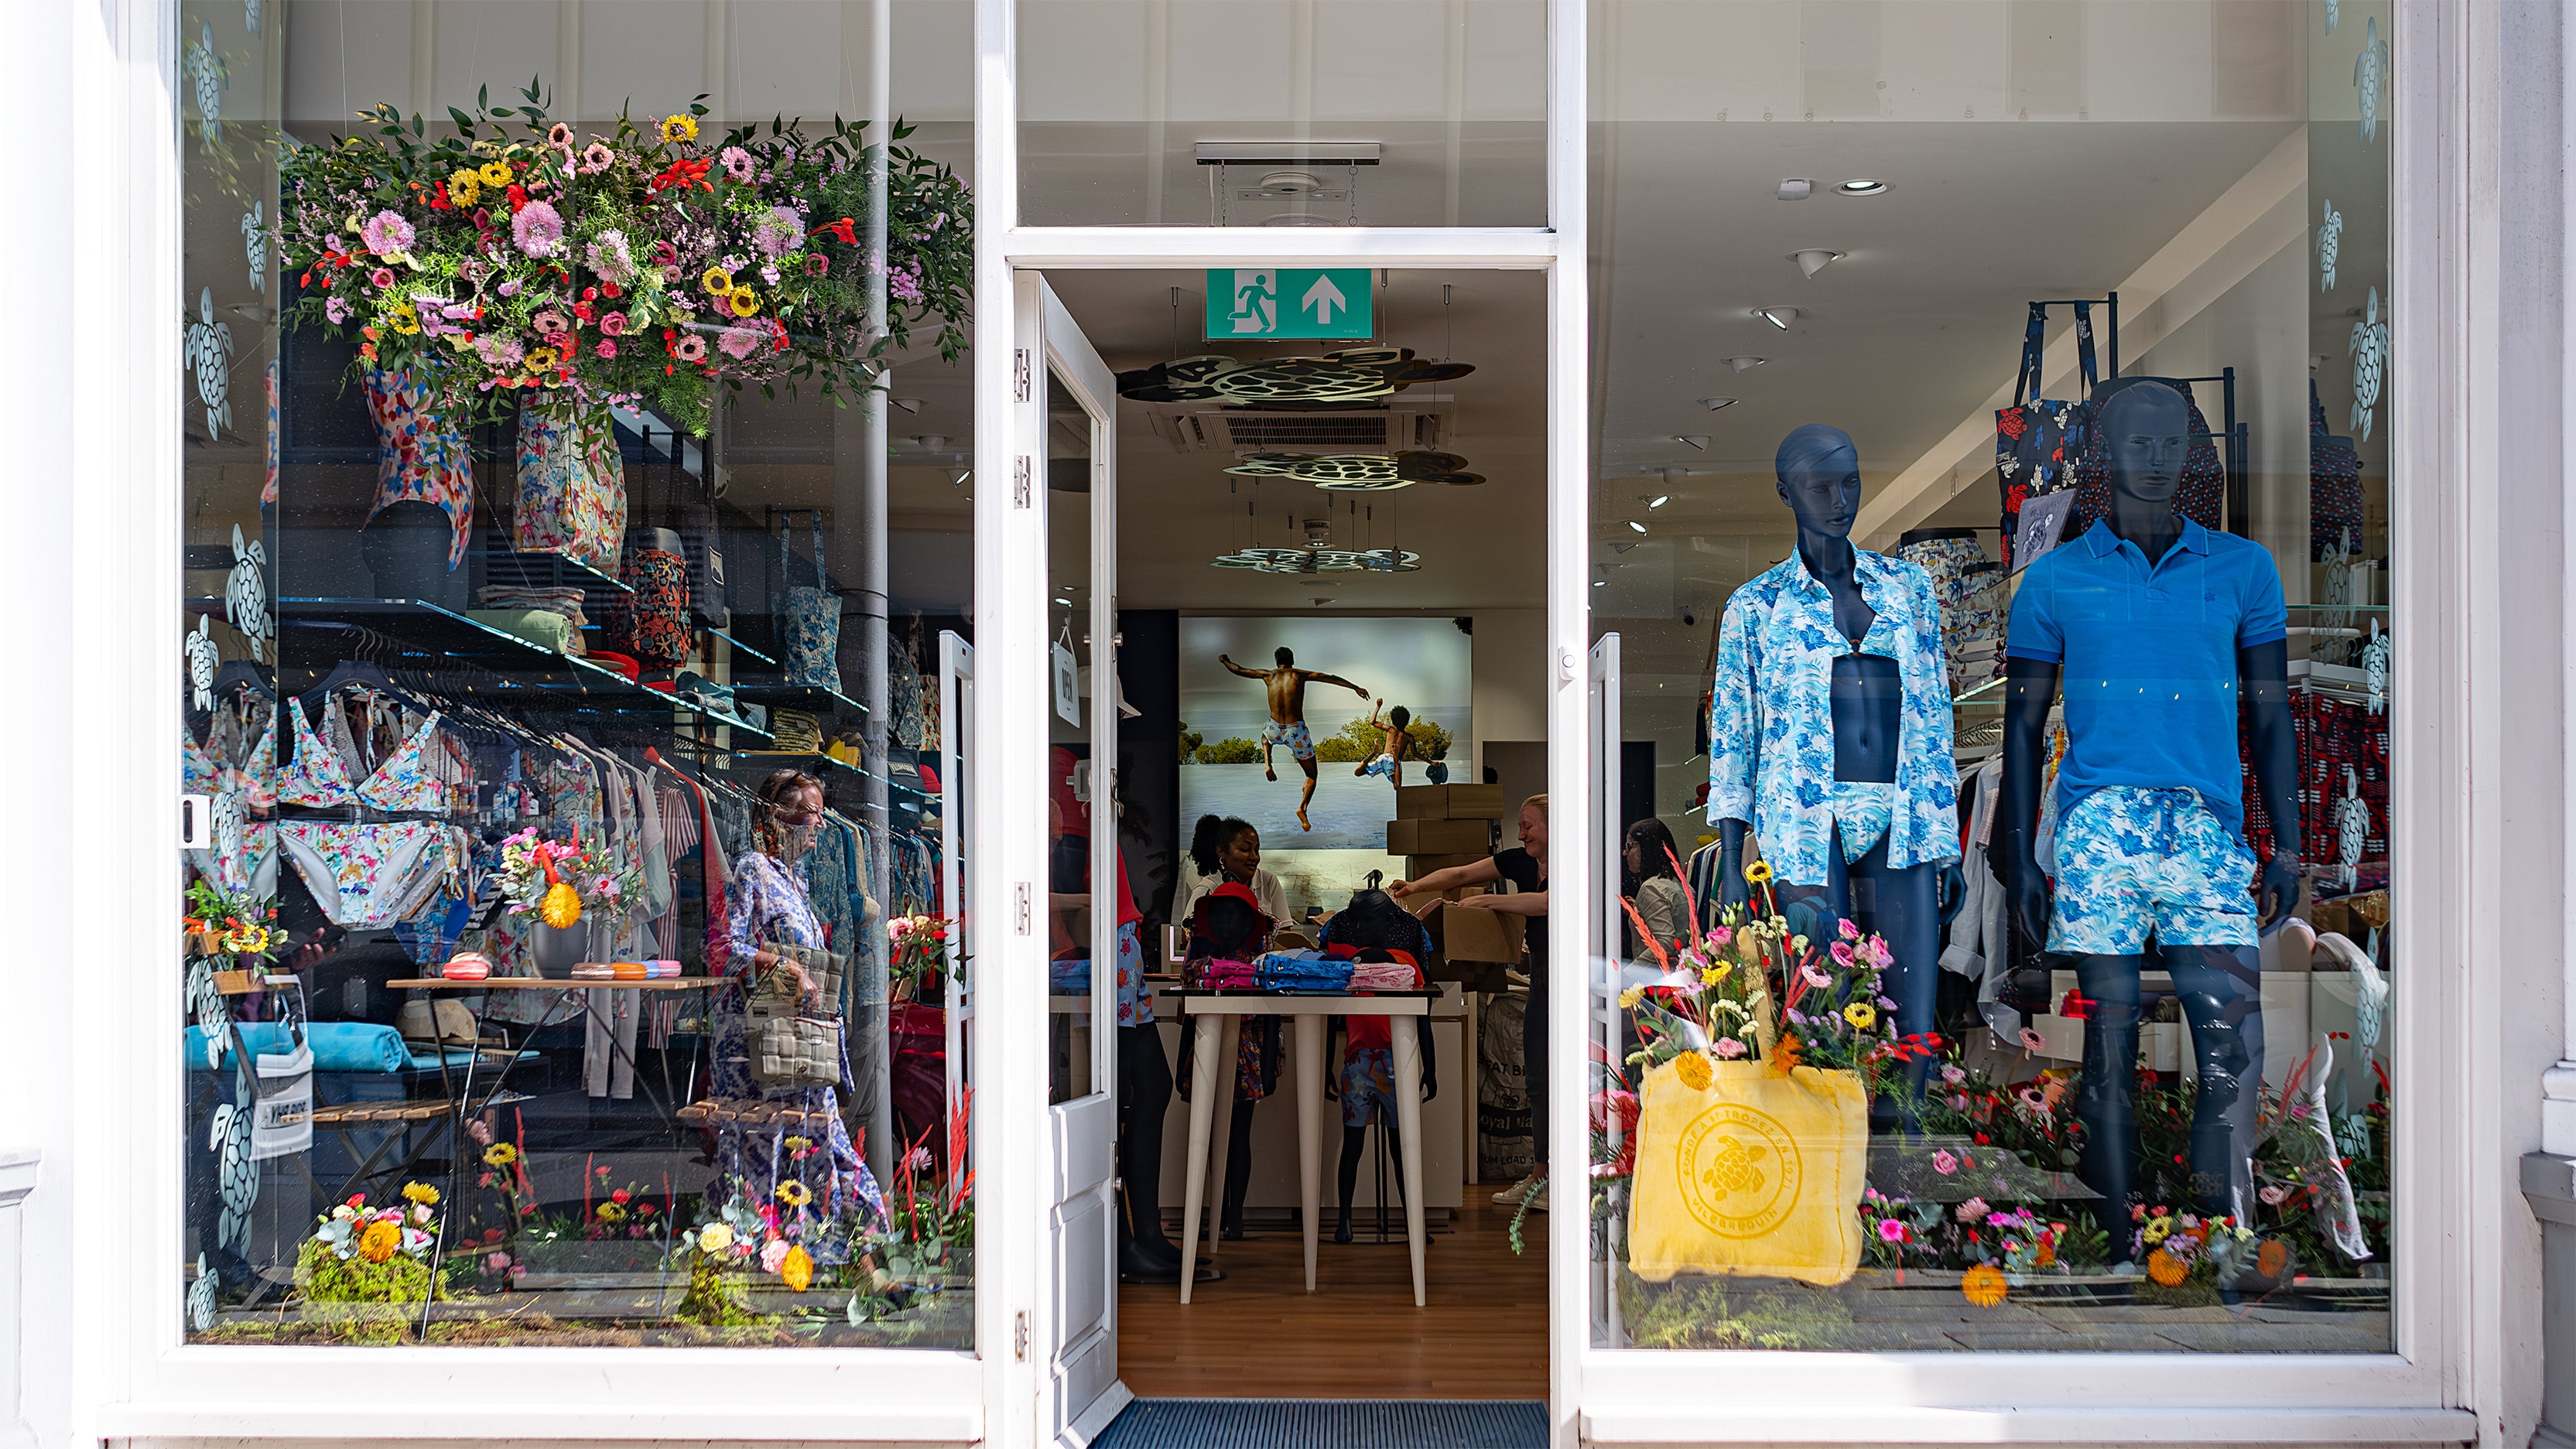 In this image, the Vilebrequin storefront is adorned with an exquisite bespoke floral arrangement designed, created and installed by event florist Amaranté London for Chelsea in Bloom. The display features a hanging floral installation and a variety of colourful flowers, enhancing the luxury swimwear boutique.